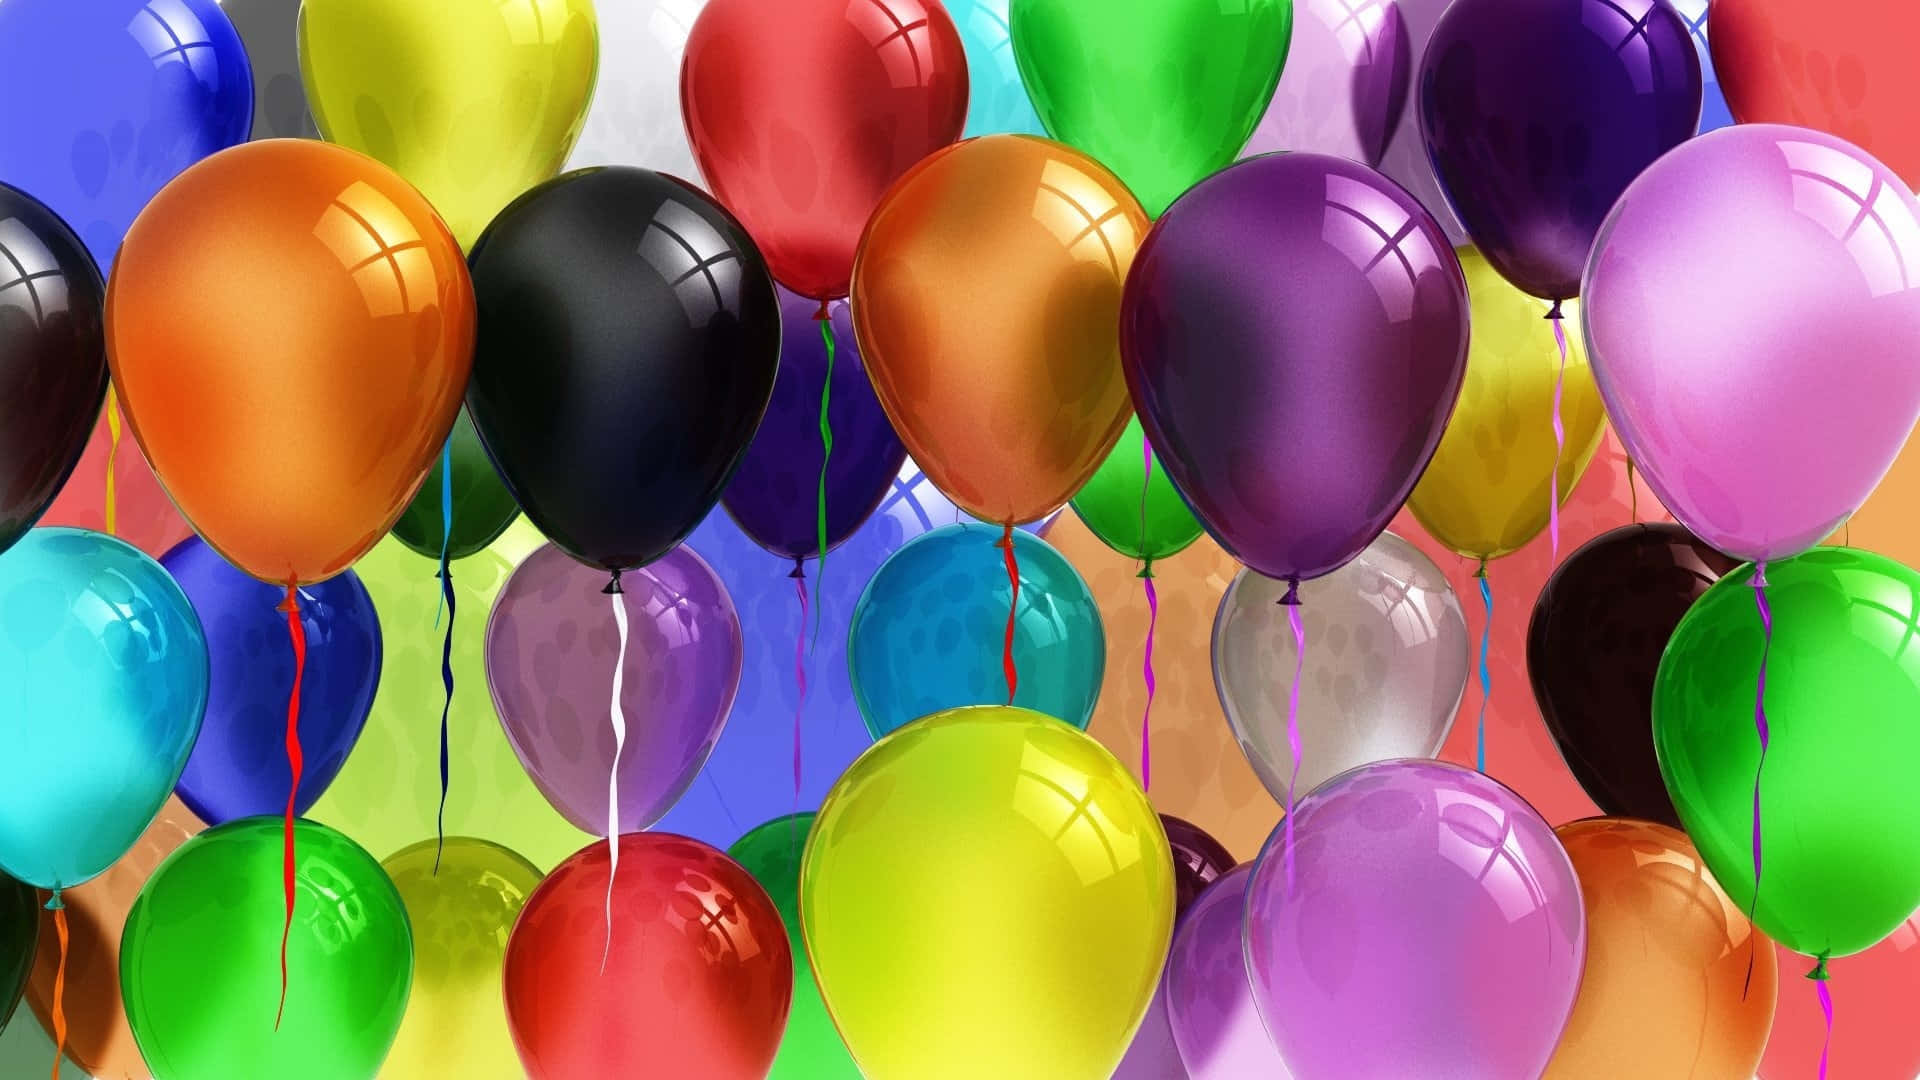 Balloons Background Colorful Party Balloons Floating